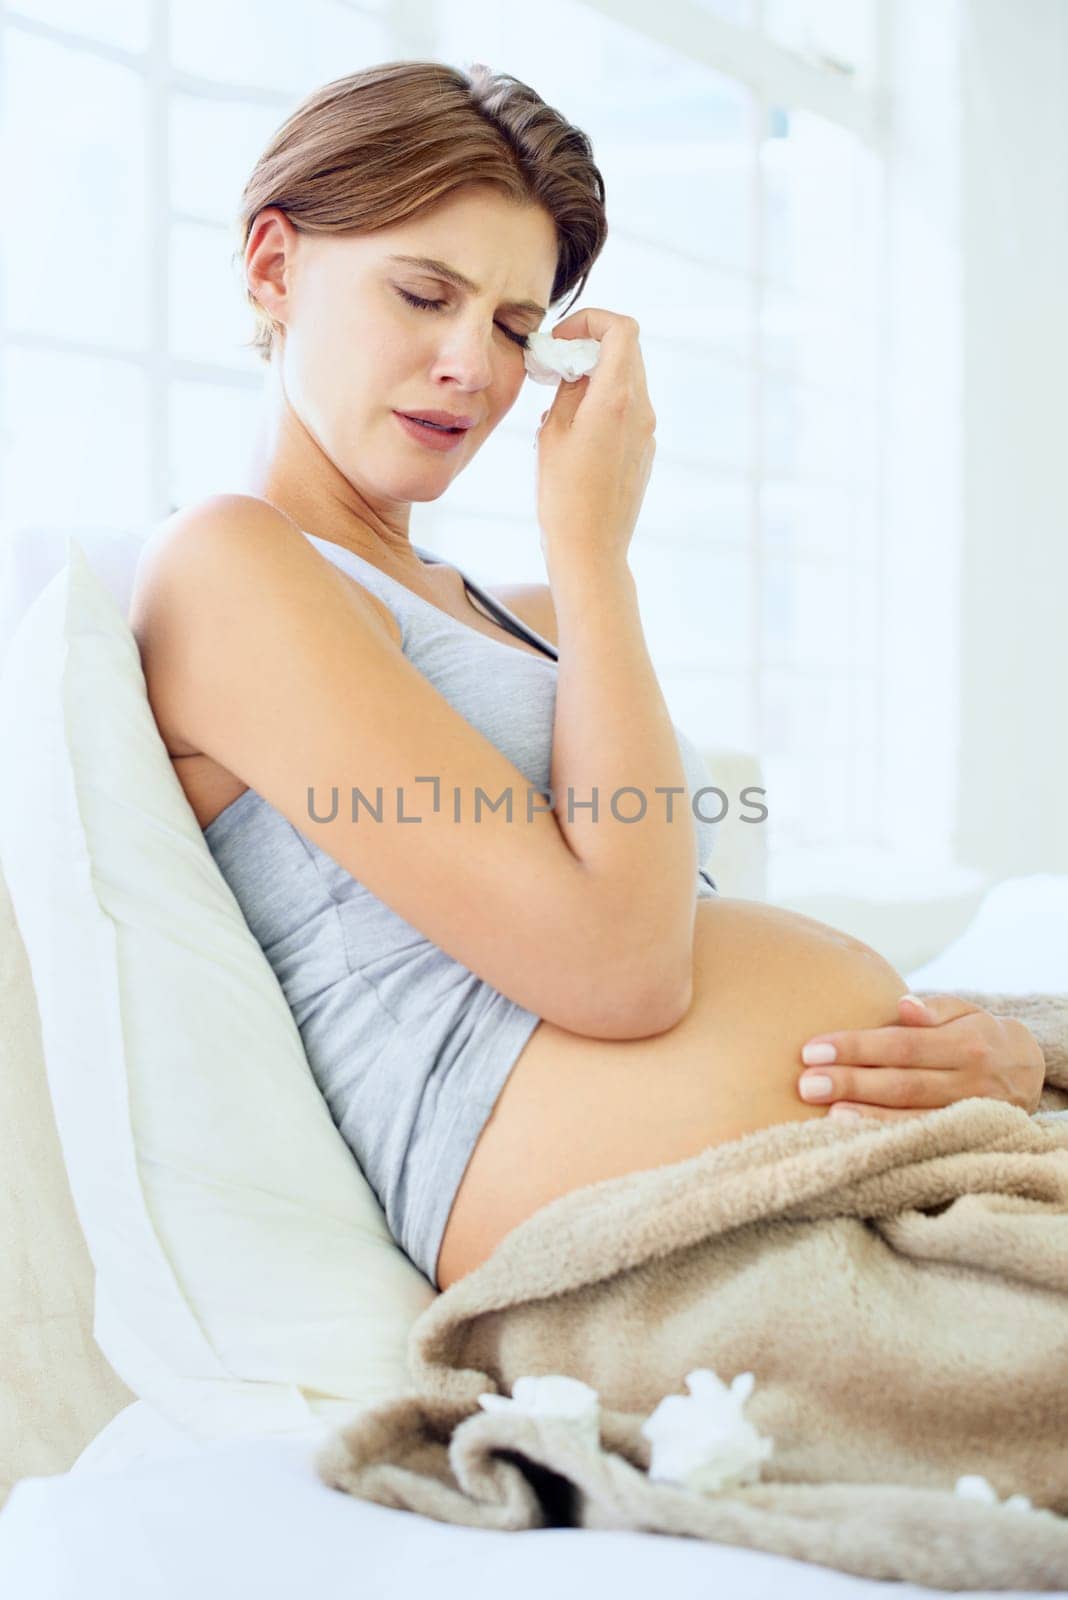 Crying, tissue and pregnant woman in a bed with depression, worry or fear for the future at home. Maternity, anxiety or person in bedroom with pregnancy mood swings, hormones or overwhelmed in house.